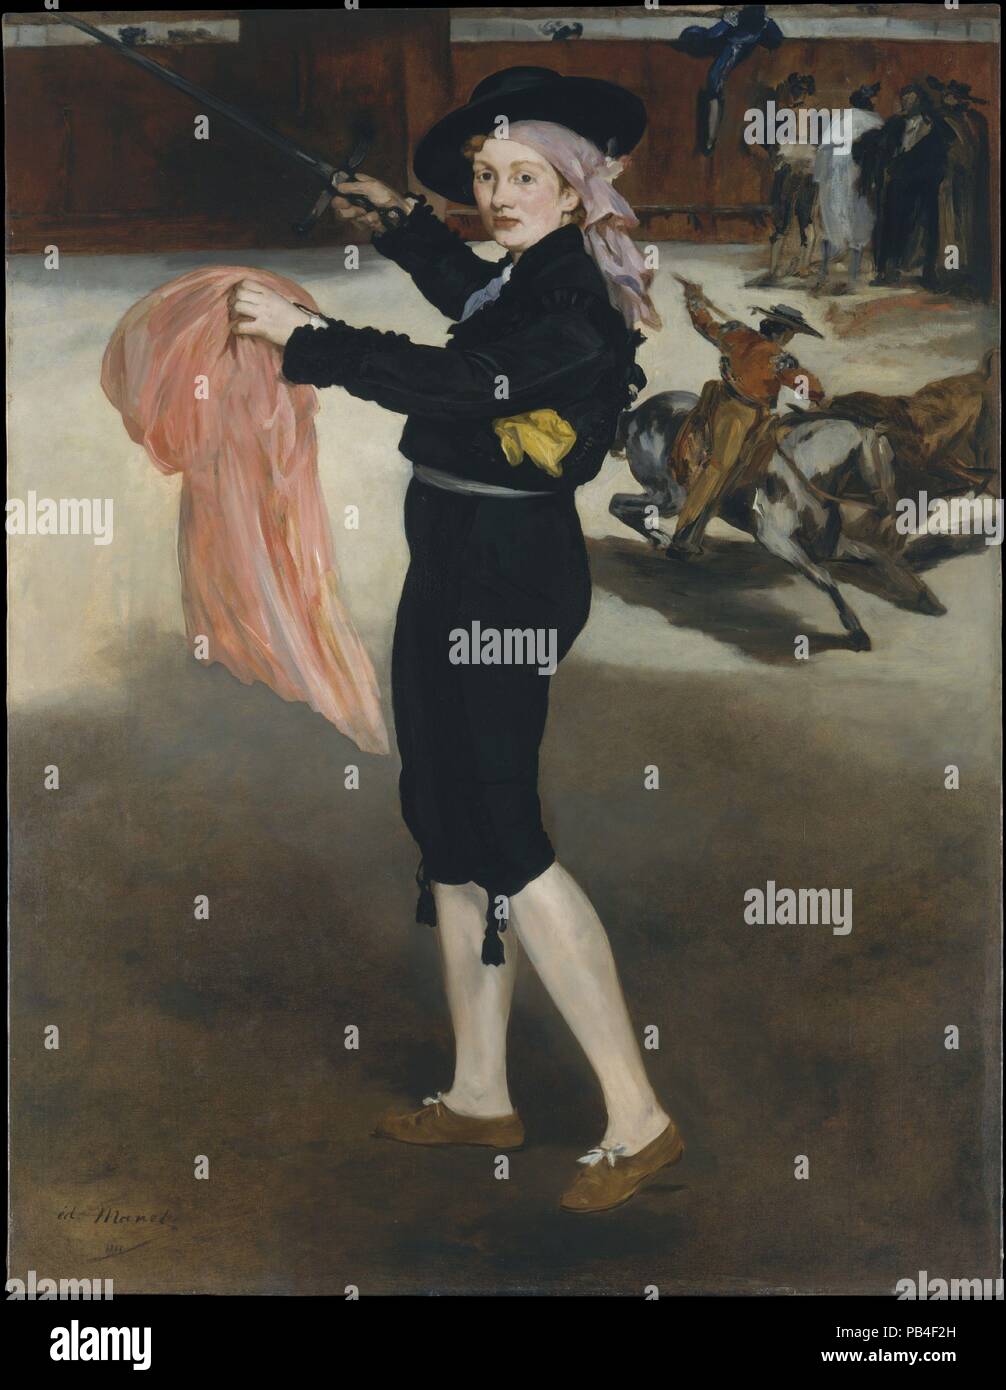 Mademoiselle V. . . in the Costume of an Espada. Artist: Édouard Manet (French, Paris 1832-1883 Paris). Dimensions: 65 x 50 1/4 in. (165.1 x 127.6 cm). Date: 1862.  Manet depicted model Victorine Meurent (1844-1928) in the guise of a male <i>espada</i>, or matador, borrowing her pose from a Renaissance print. Victorine's shoes are unsuitable for bullfighting, and the pink cape that she flourishes is the wrong hue, but she carries off her role with panache. The backdrop reproduces a scene from Goya's <i>Tauromaquia</i> series, celebrating the feats of bullfighters. When this painting was exhibi Stock Photo